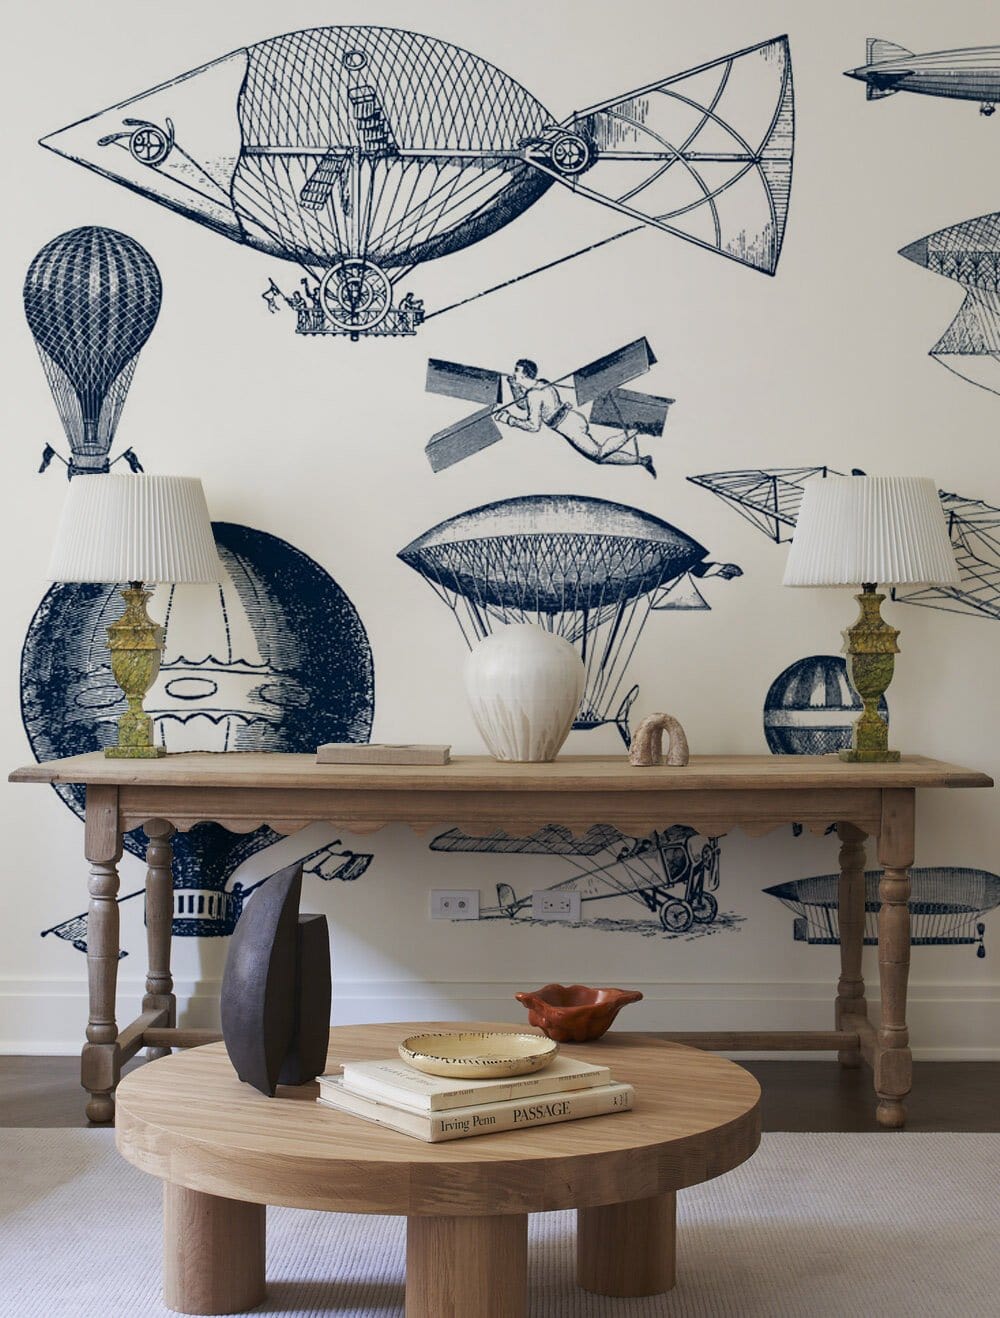 Decoration for the Living Room Featuring an Aircraft Revolution Industrial Wallpaper Mural